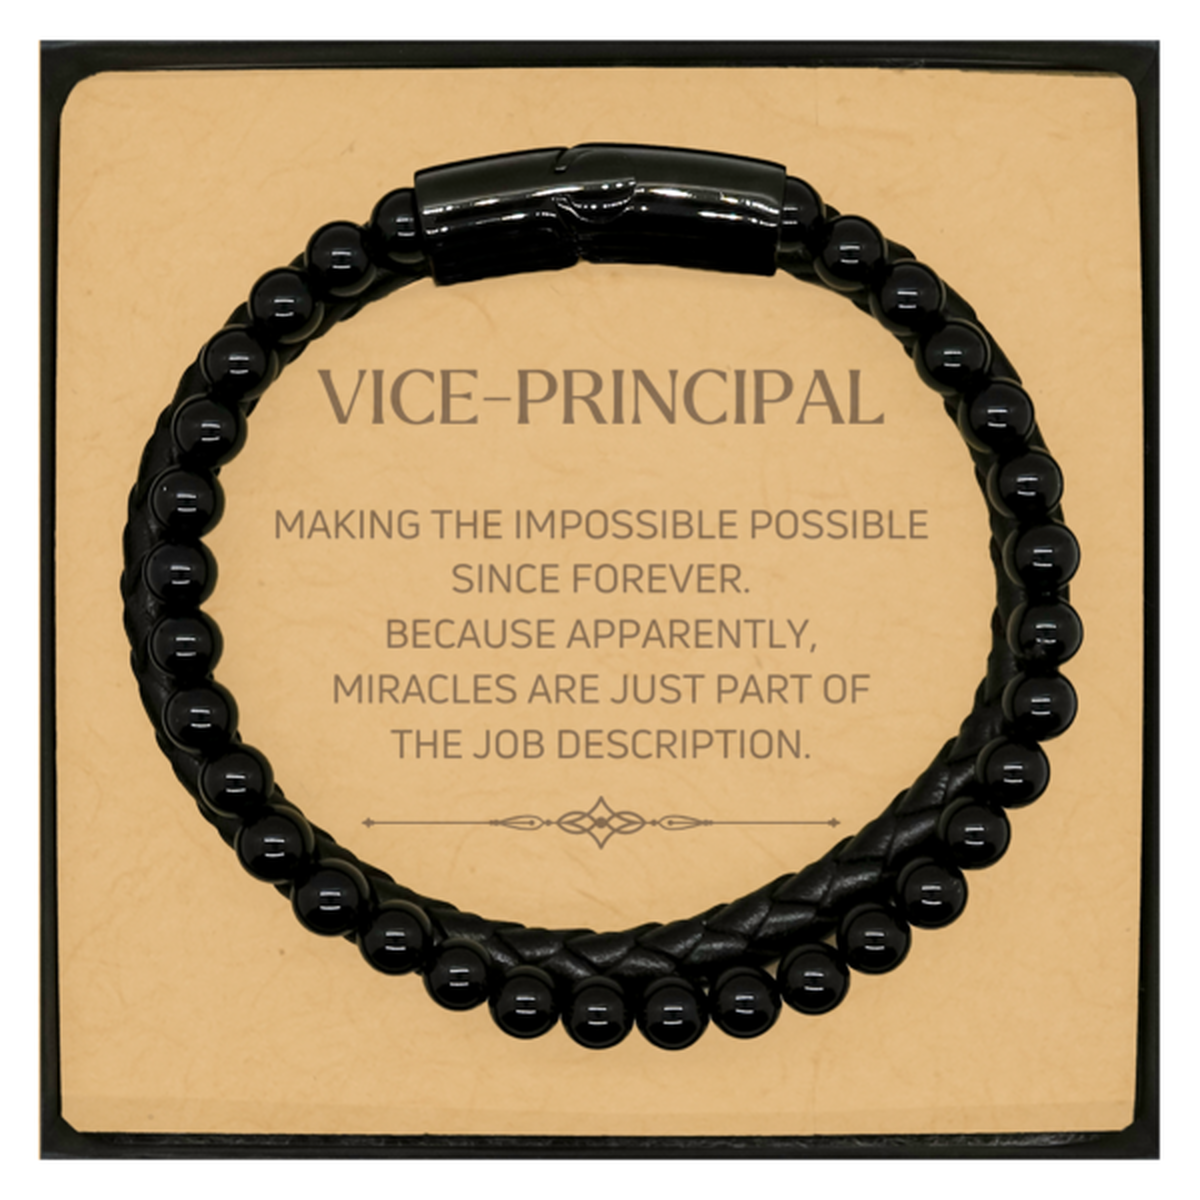 Funny Vice-principal Gifts, Miracles are just part of the job description, Inspirational Birthday Christmas Stone Leather Bracelets For Vice-principal, Men, Women, Coworkers, Friends, Boss